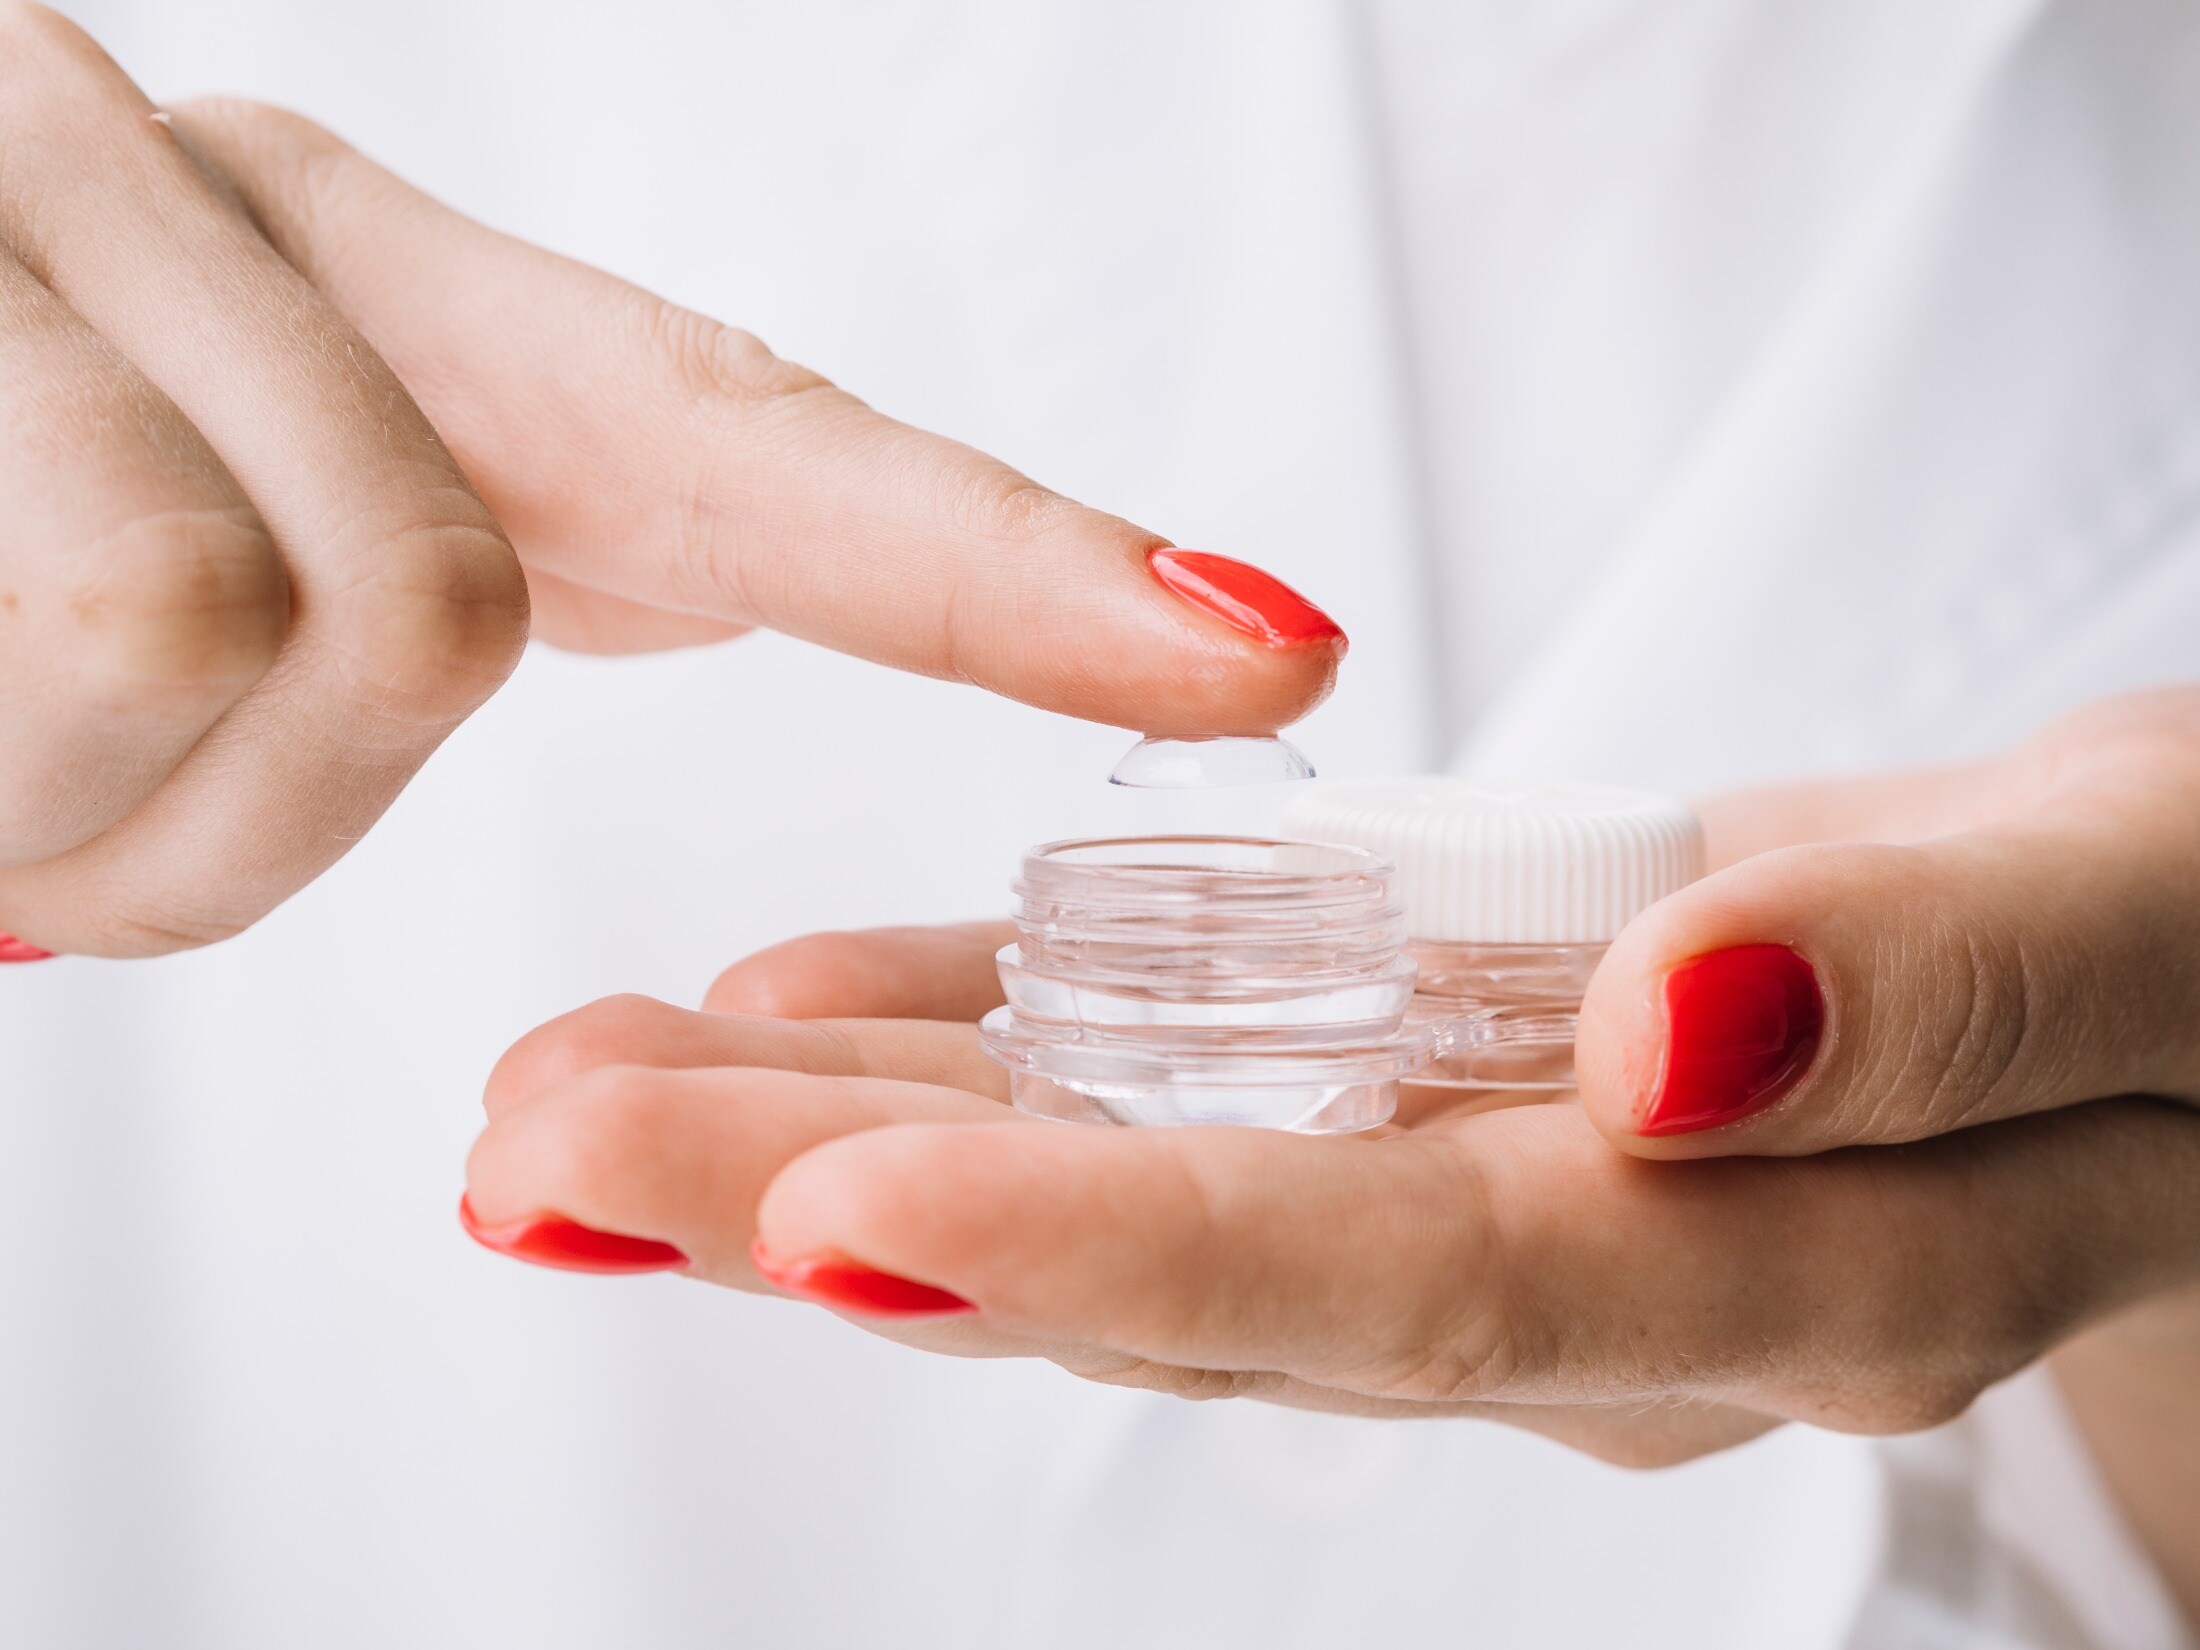 How To Store Contact Lenses For A Long Time